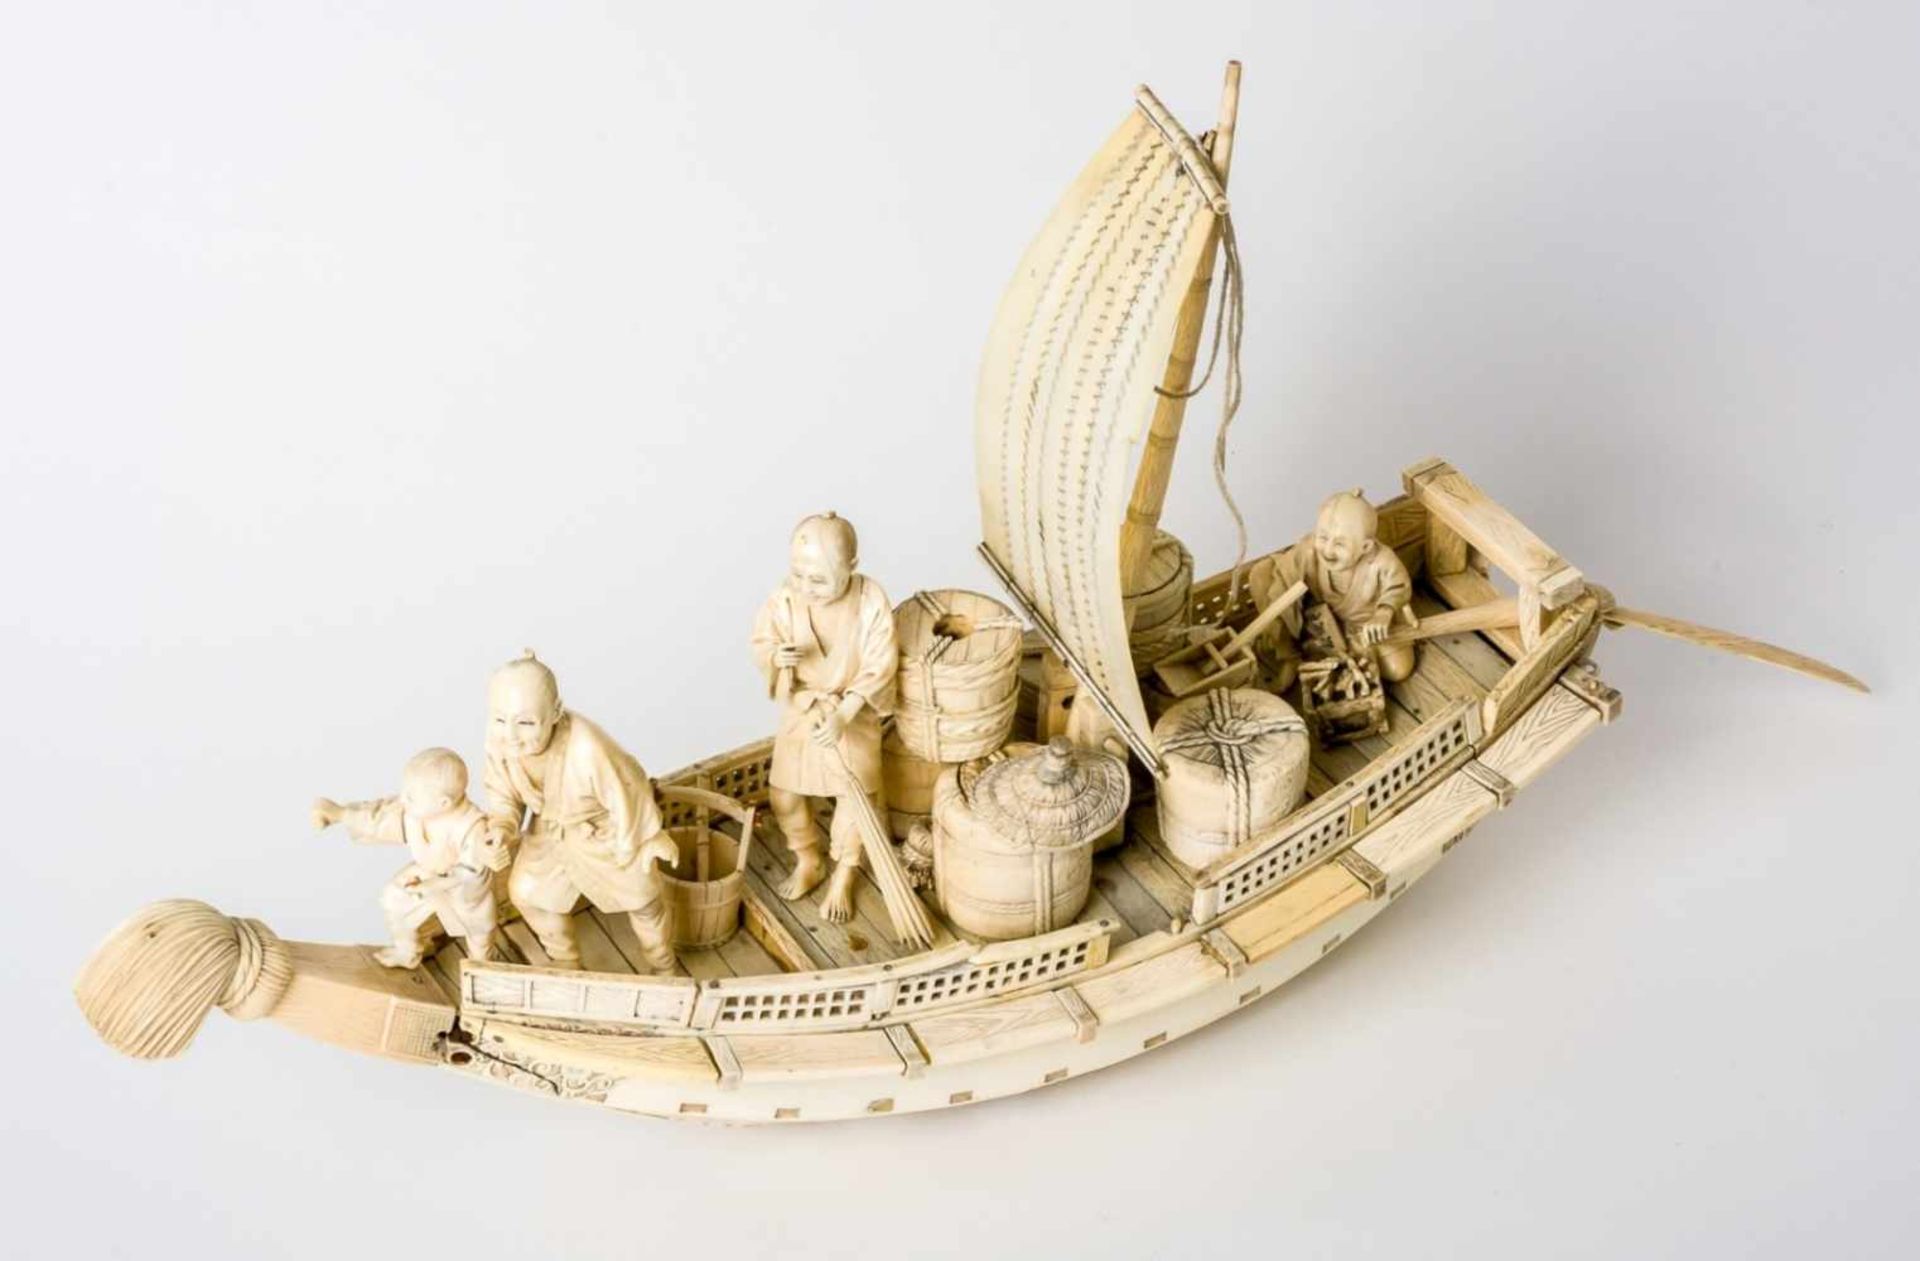 Sailboat with 4 persons and goods, Japan, ivory carving, probably around 1900length approx. 52 cm,